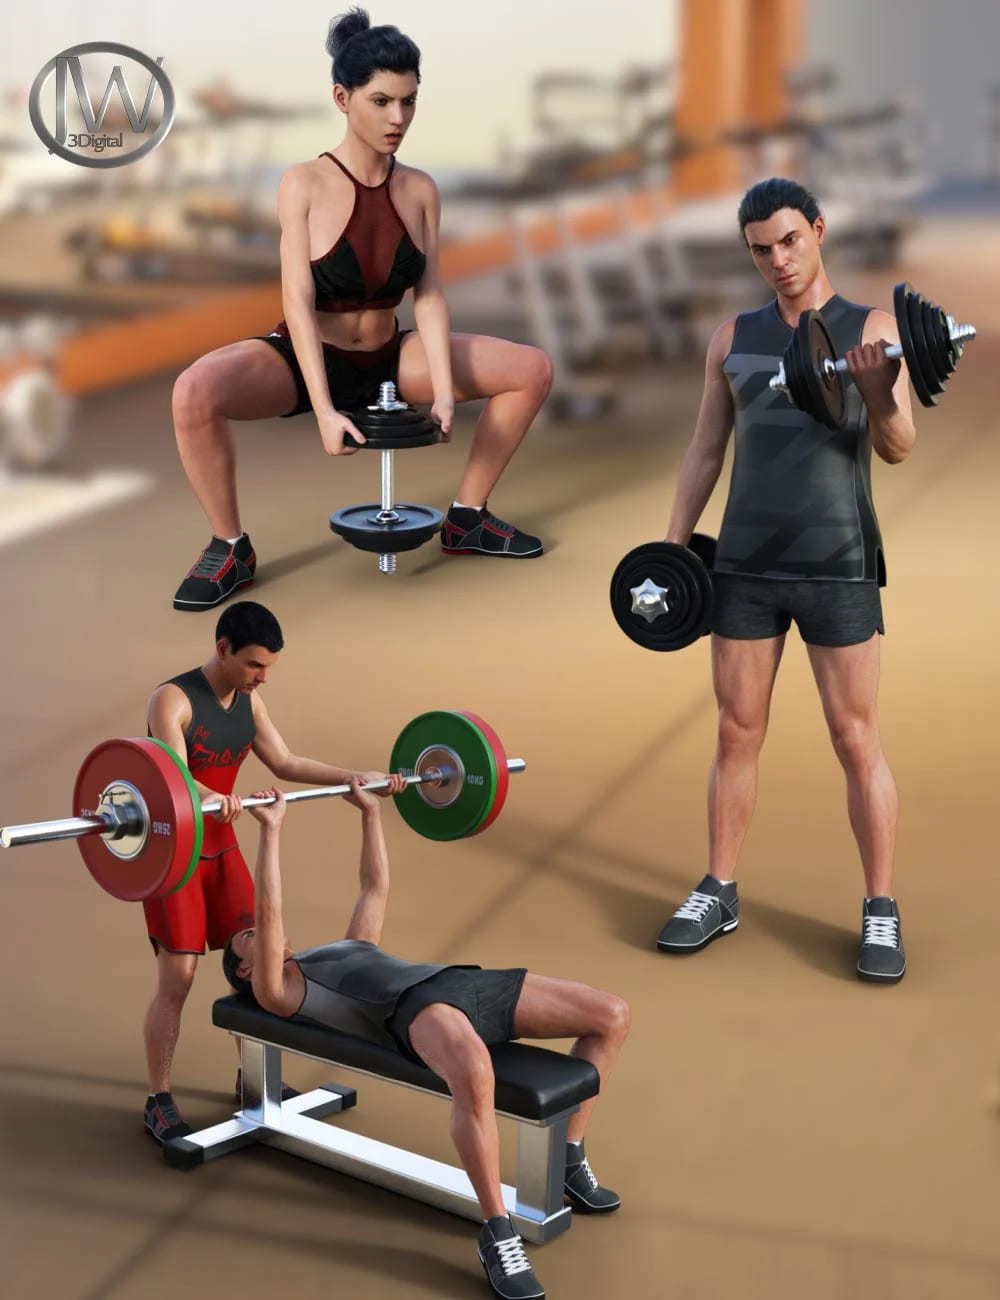 Weight Workout Props and Poses for Genesis 8_DAZ3D下载站